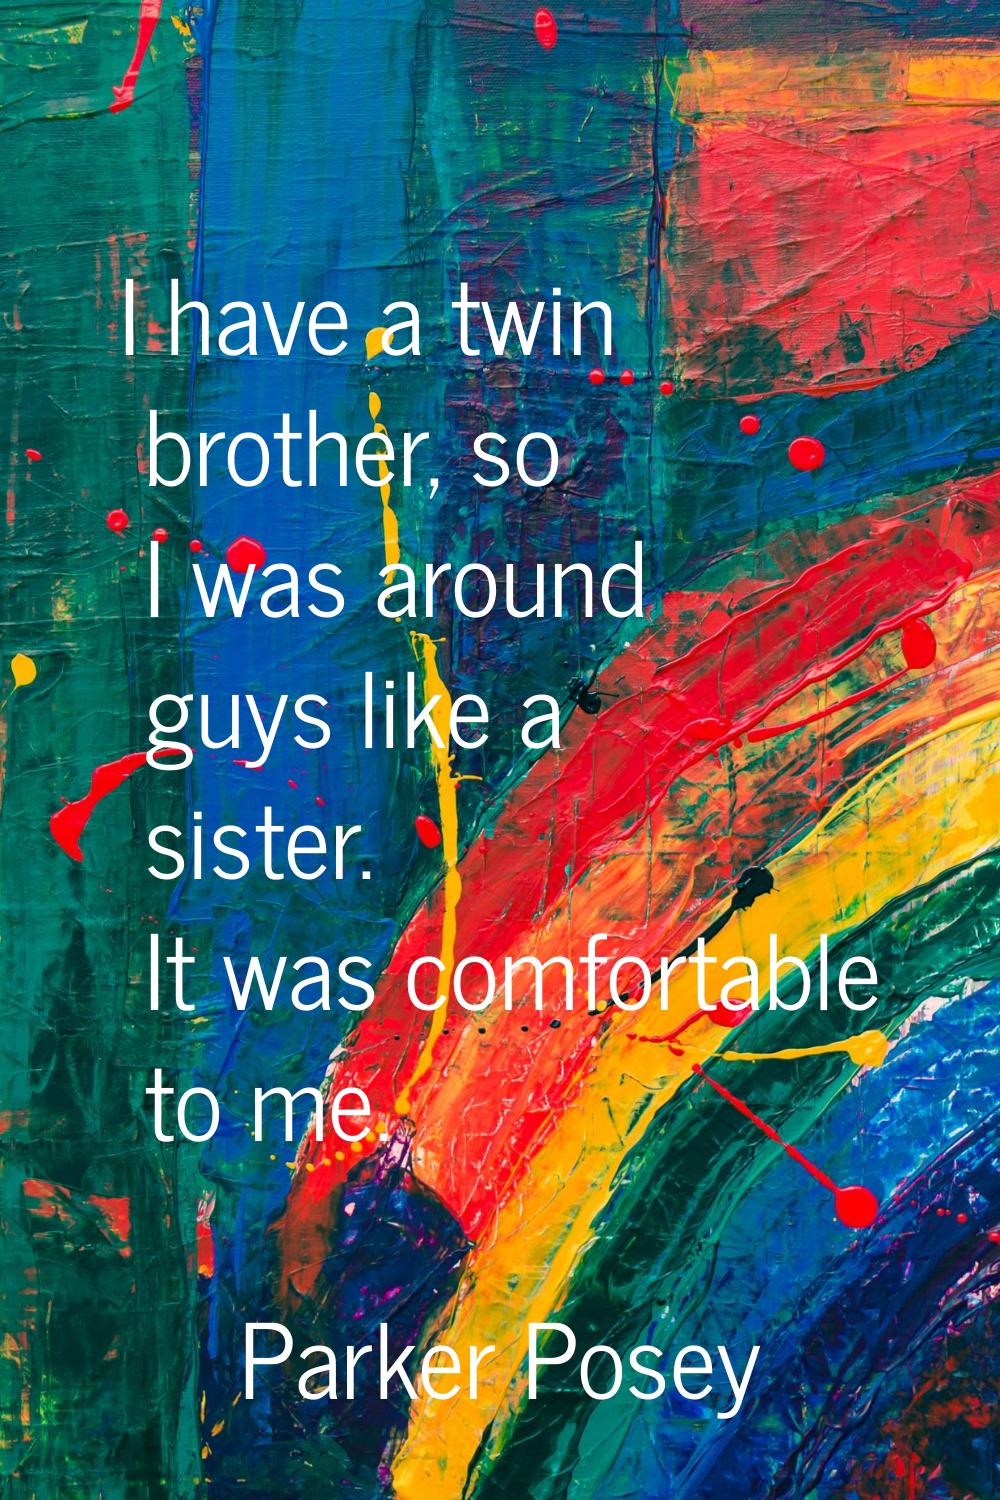 I have a twin brother, so I was around guys like a sister. It was comfortable to me.